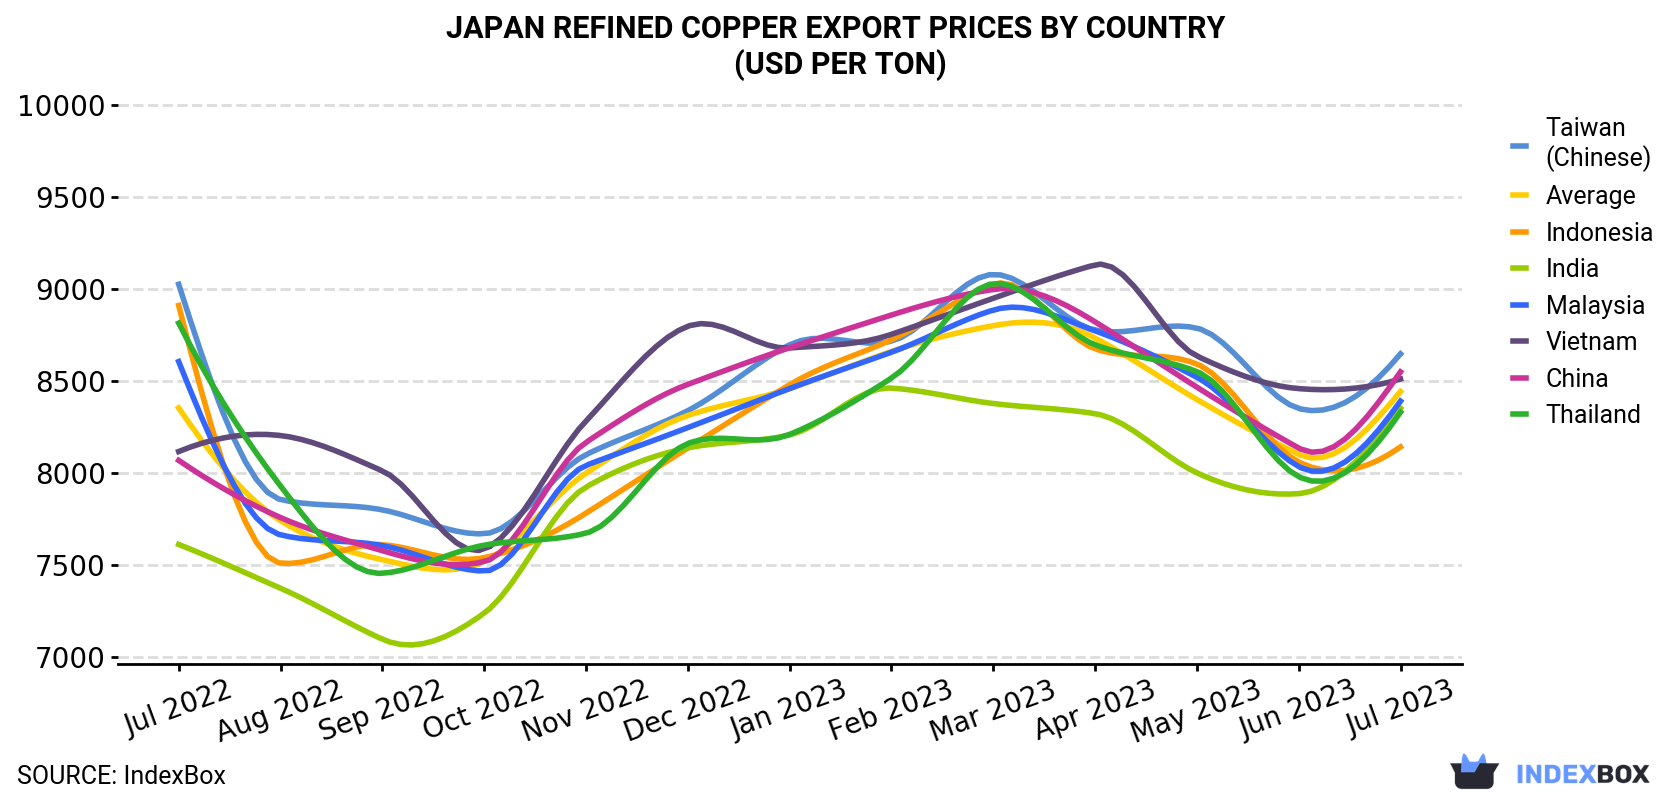 Japan Refined Copper Export Prices By Country (USD Per Ton)